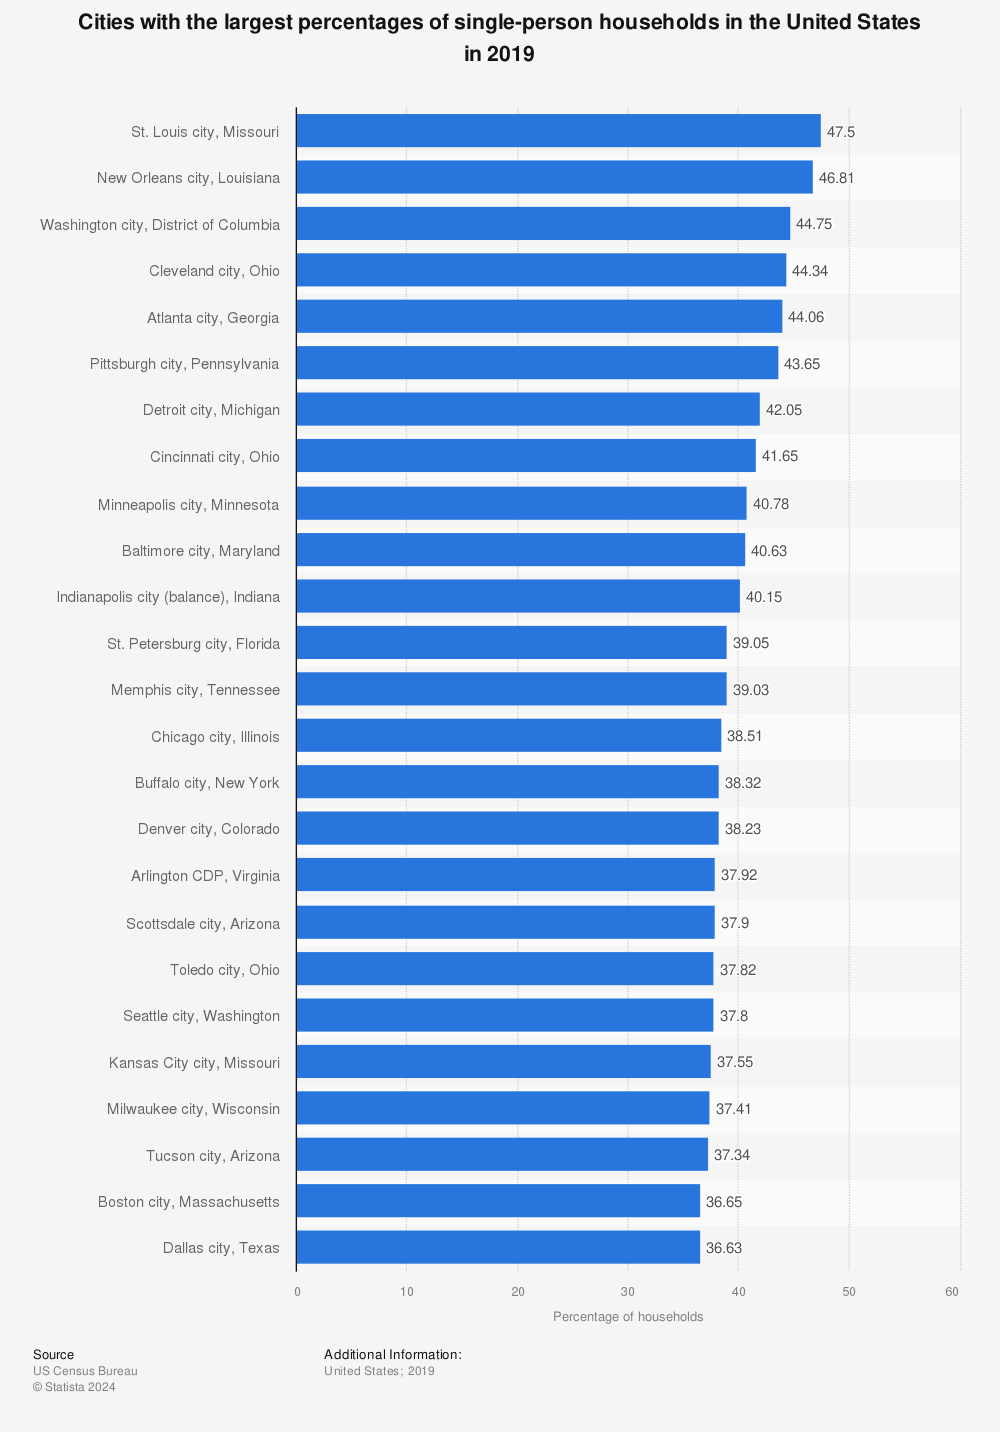 Statistic: Cities with the largest percentages of single-person households in the United States in 2019 | Statista